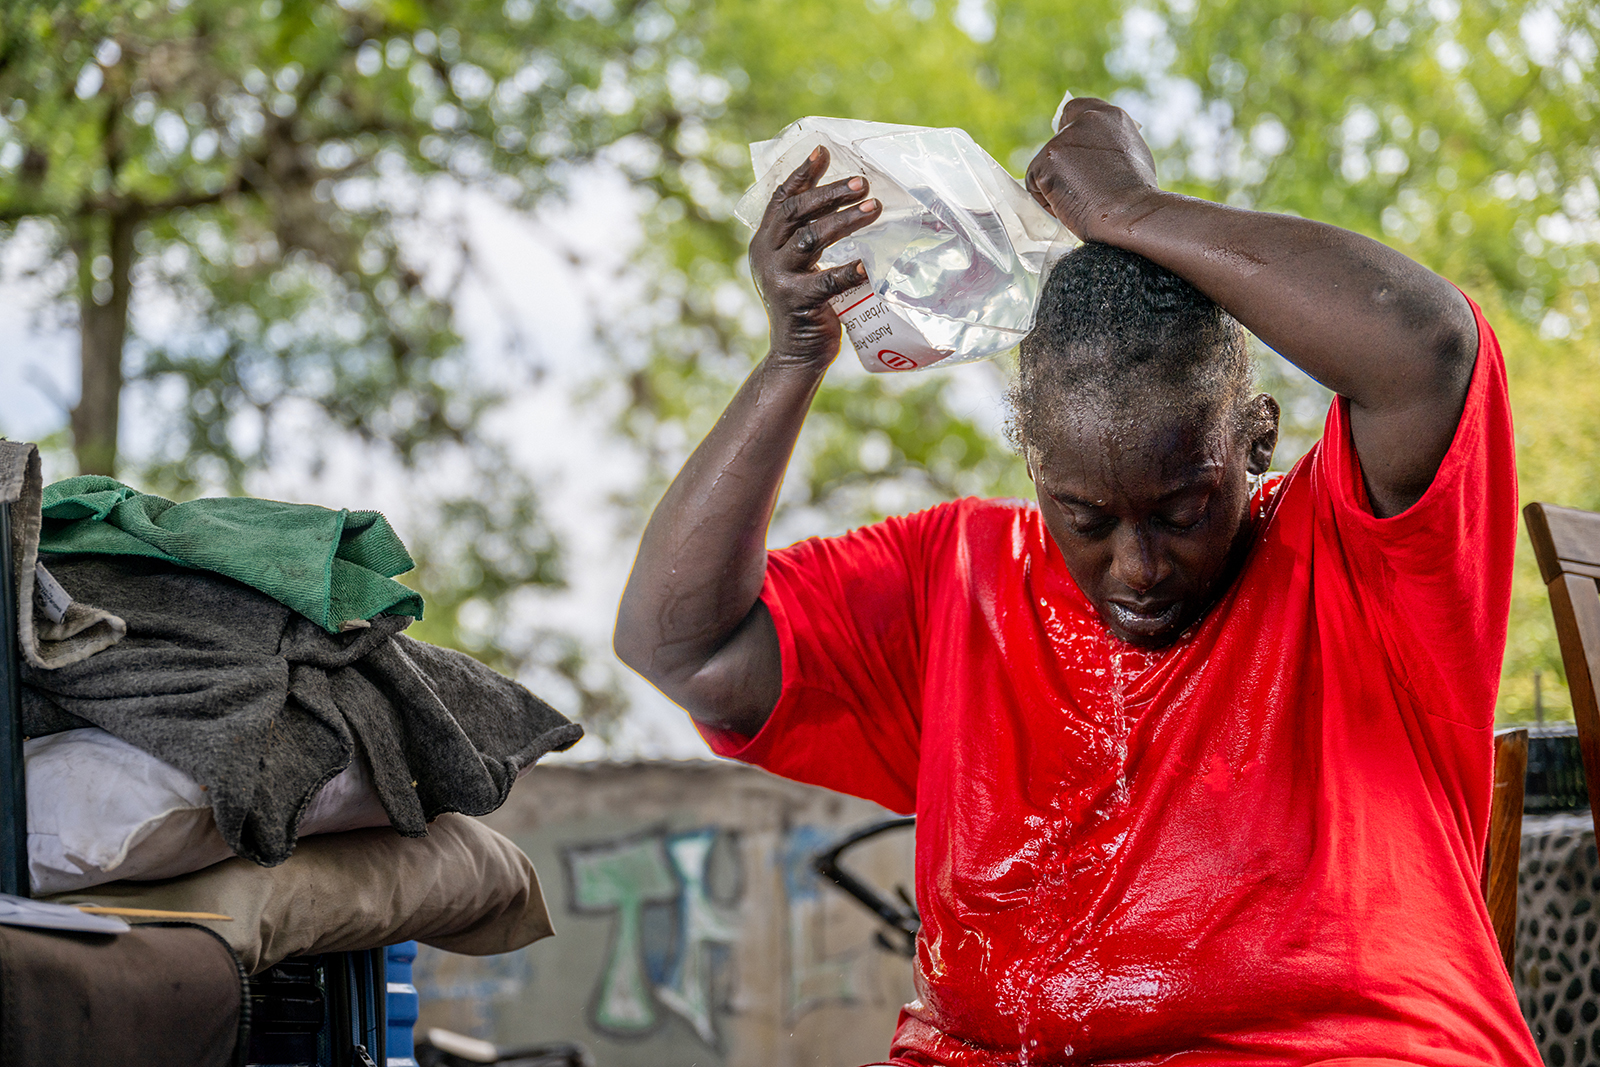 A woman pours water on herself to cool off in Austin, Texas on July 11.